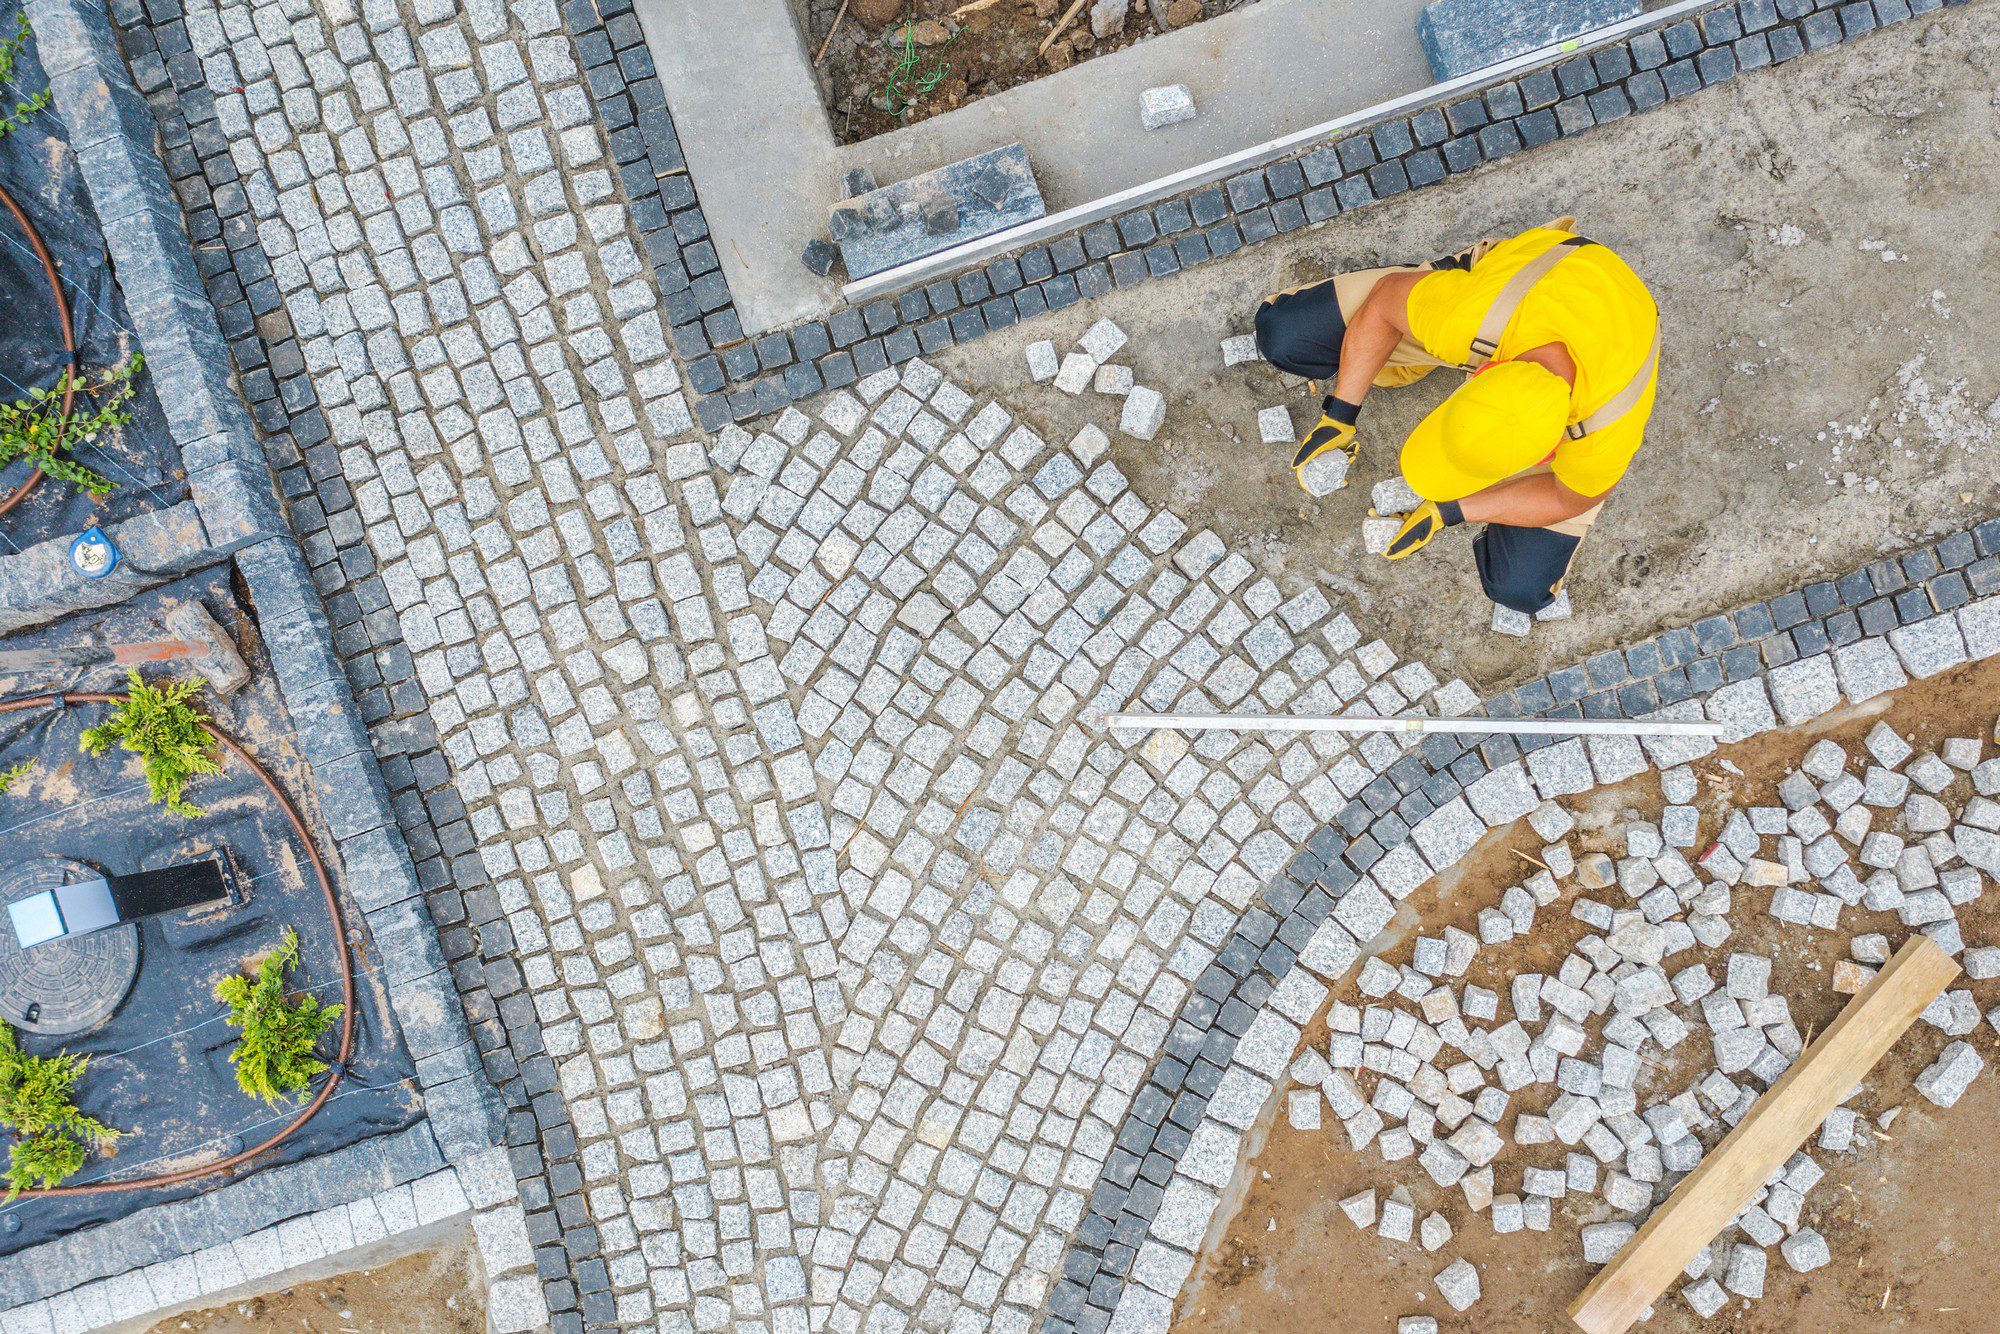 The image shows an aerial view of a person laying paving stones on a road or pathway. The person is wearing a yellow high-visibility jacket and a yellow hard hat, indicating that they are likely a construction worker engaged in manual labour. The pattern of the paving stones creates a herringbone design, and the worker seems to be meticulously placing the stones to maintain the pattern.You can see different shades of paving stones, with lighter ones forming the herringbone pattern and darker ones defining the borders and edges. There are unfinished areas with a base layer of sand or gravel visible, and loose paving stones are scattered around the work area, ready to be laid down. Also noticeable are elements of urban infrastructure, like a manhole cover which has been worked around, and conduit pipes visible in the excavated sections. The presence of a wooden plank suggests it may be used to help level or set the stones.It's a clear example of urban roadwork that involves significant attention to detail and craftsmanship.